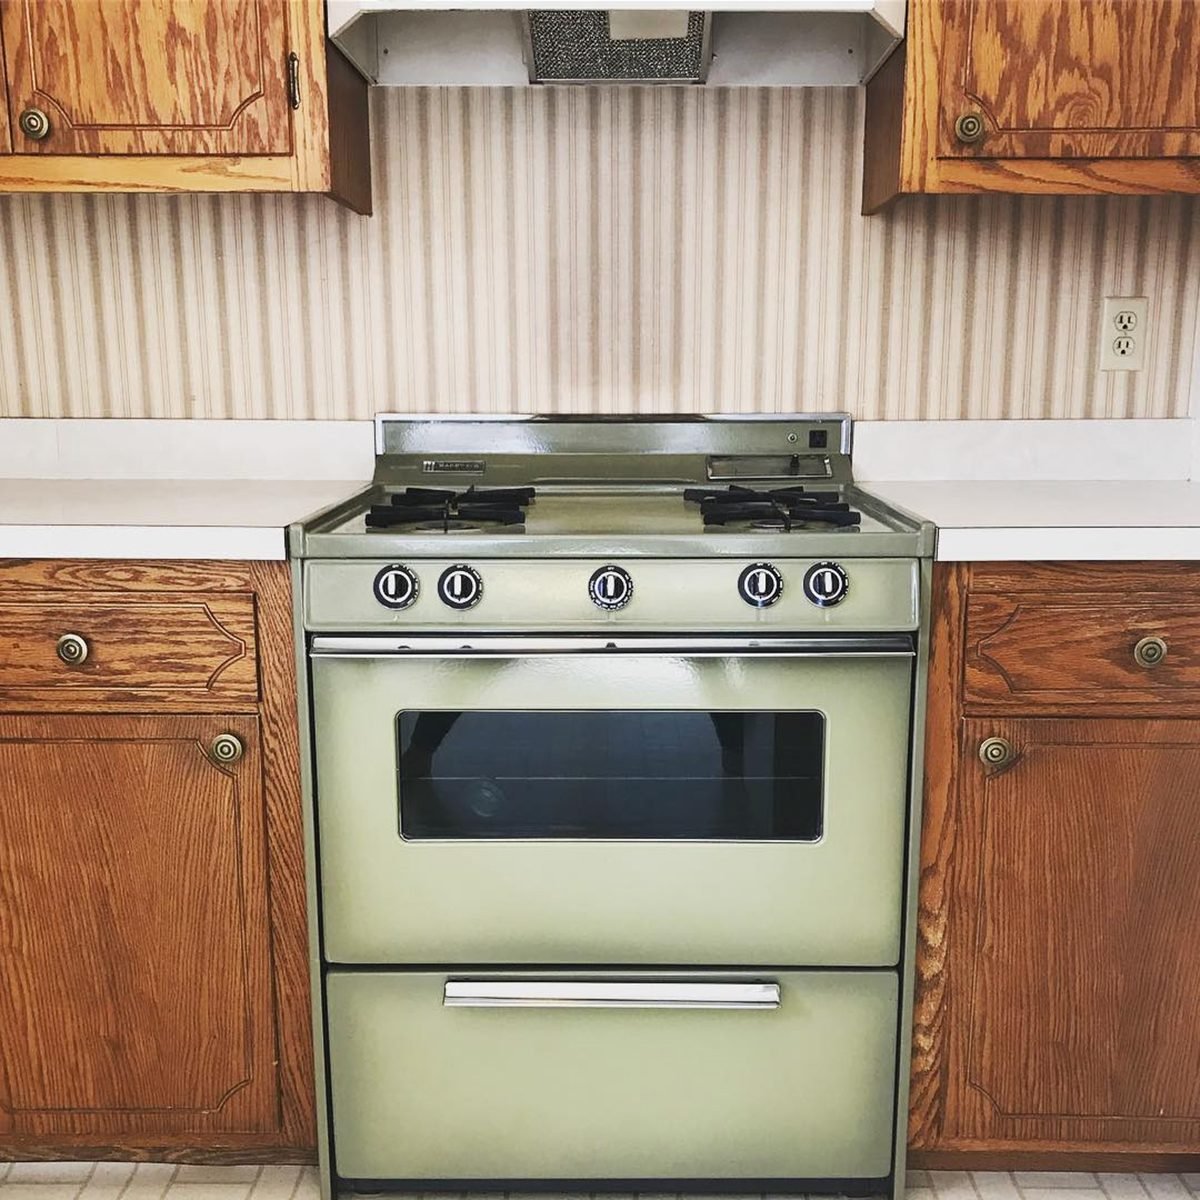 Are Colorful Kitchen Appliances Coming Back In Style?